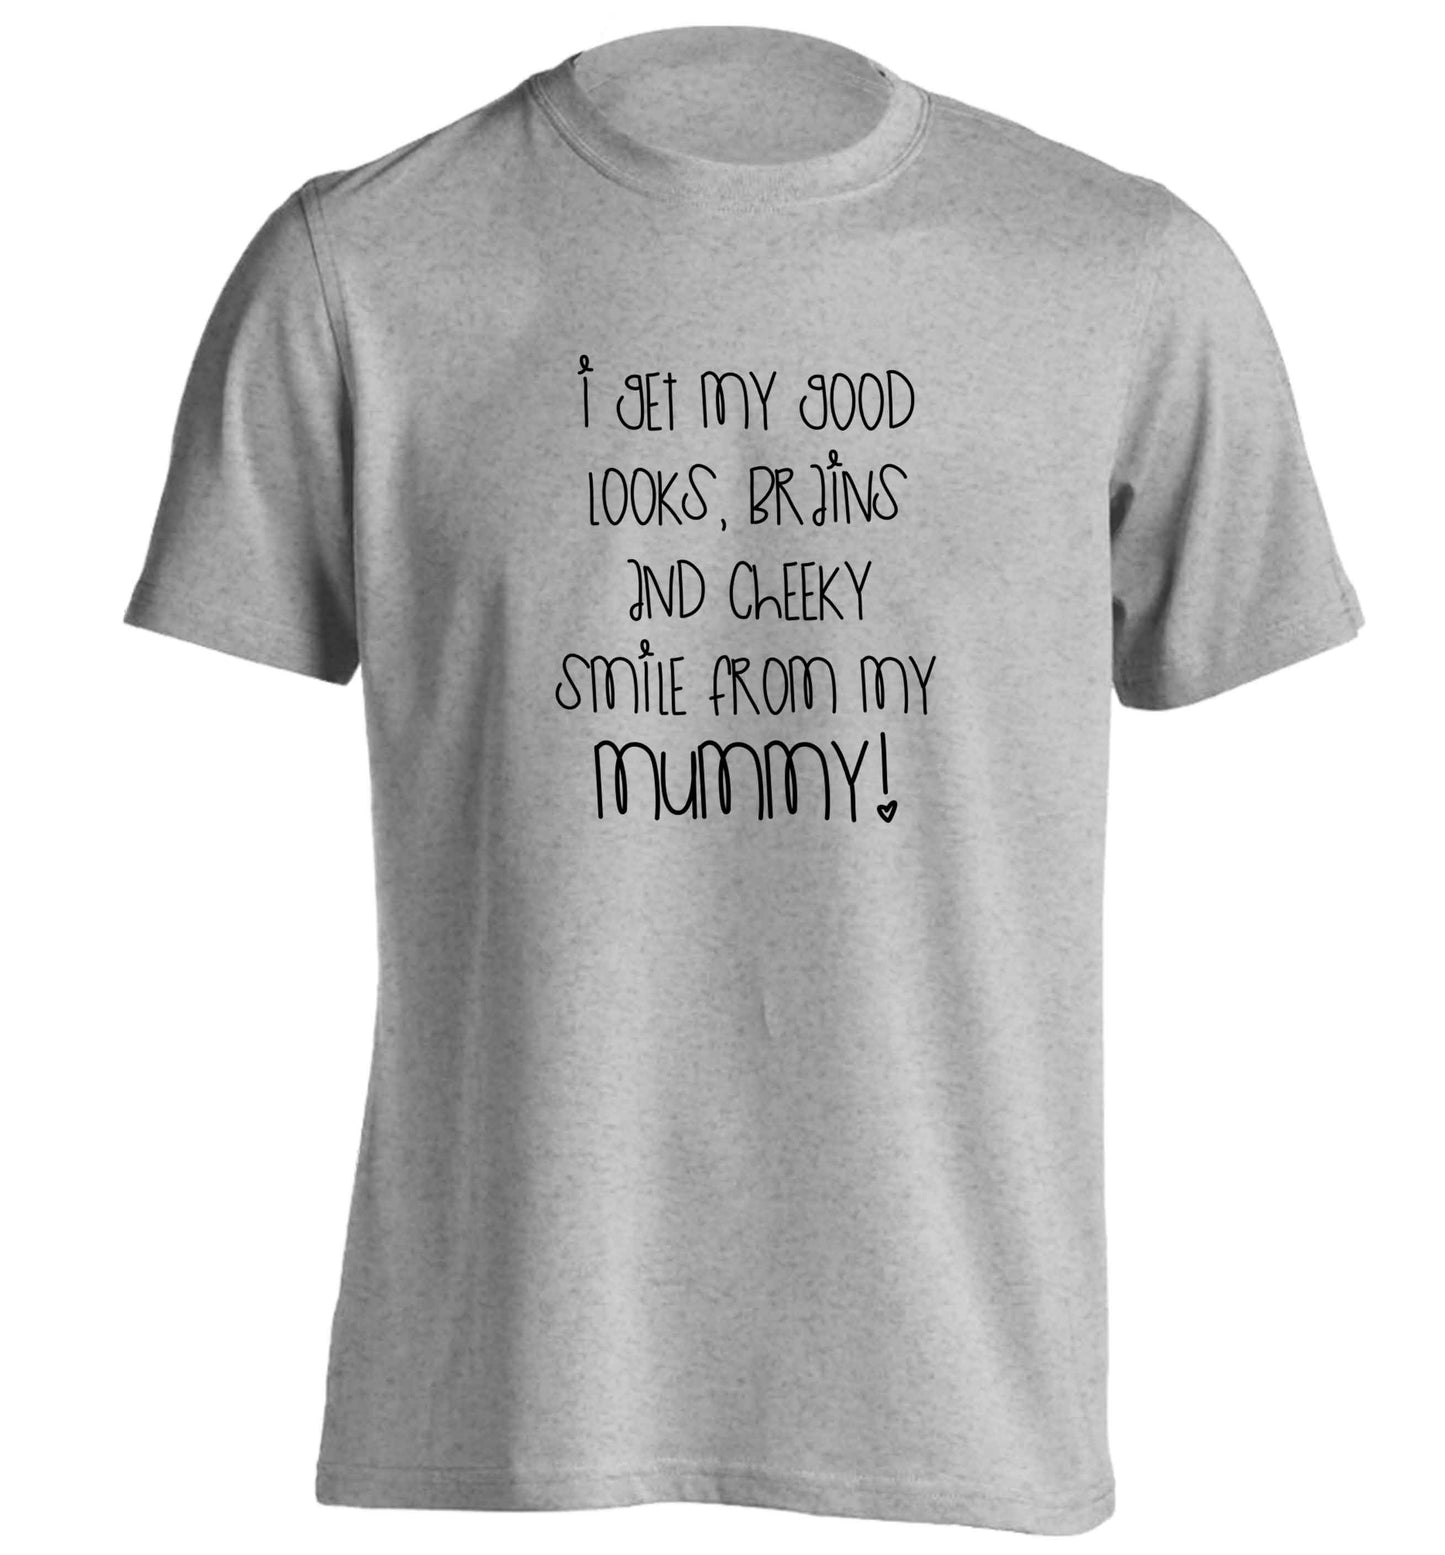 I get my good looks, brains and cheeky smile from my mummy adults unisex grey Tshirt 2XL